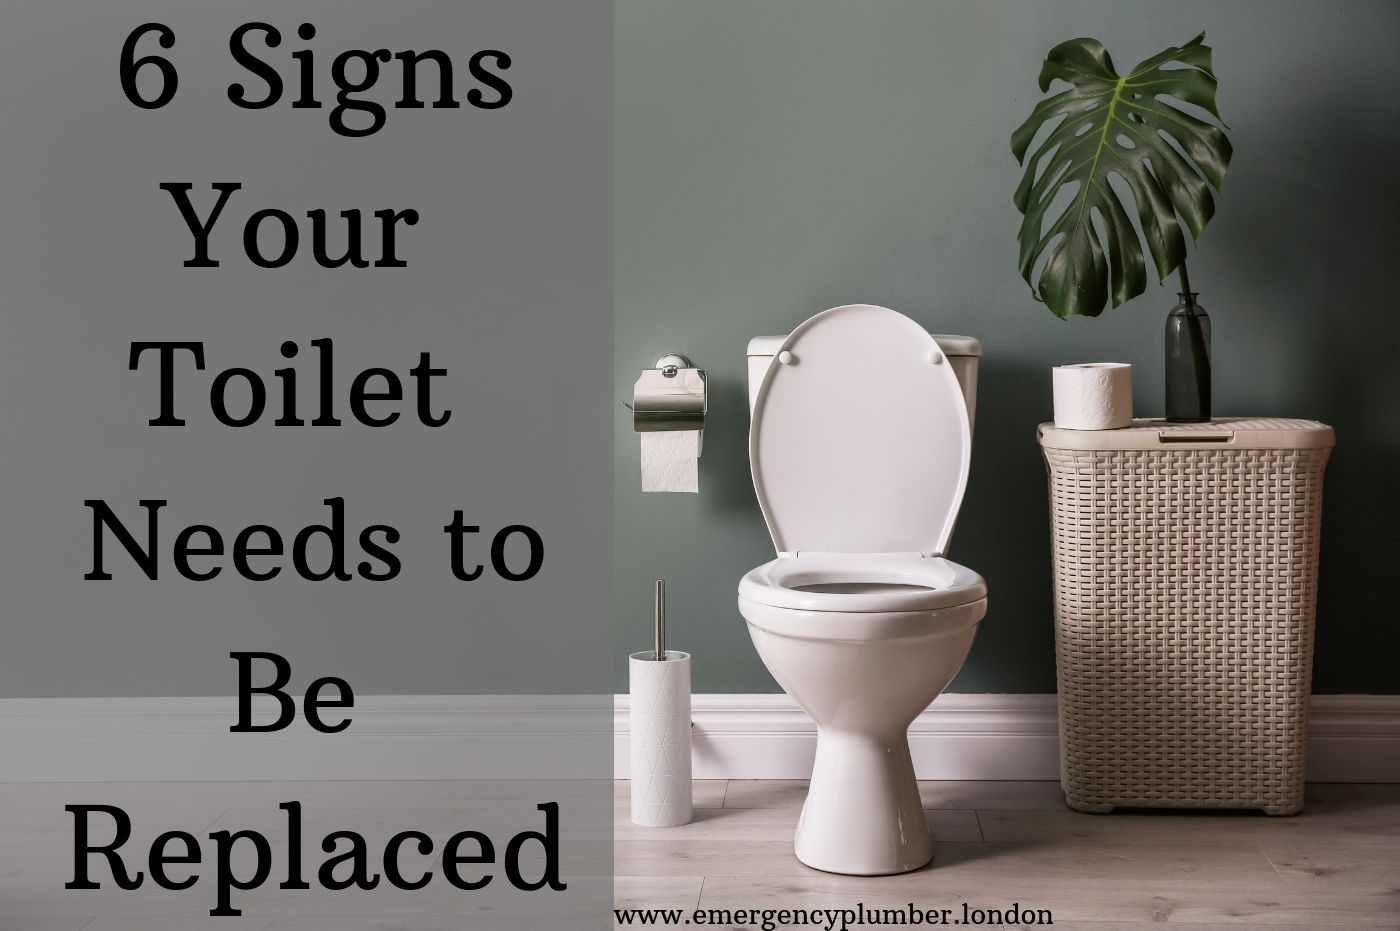 6 Signs Your Toilet Needs to Be Replaced